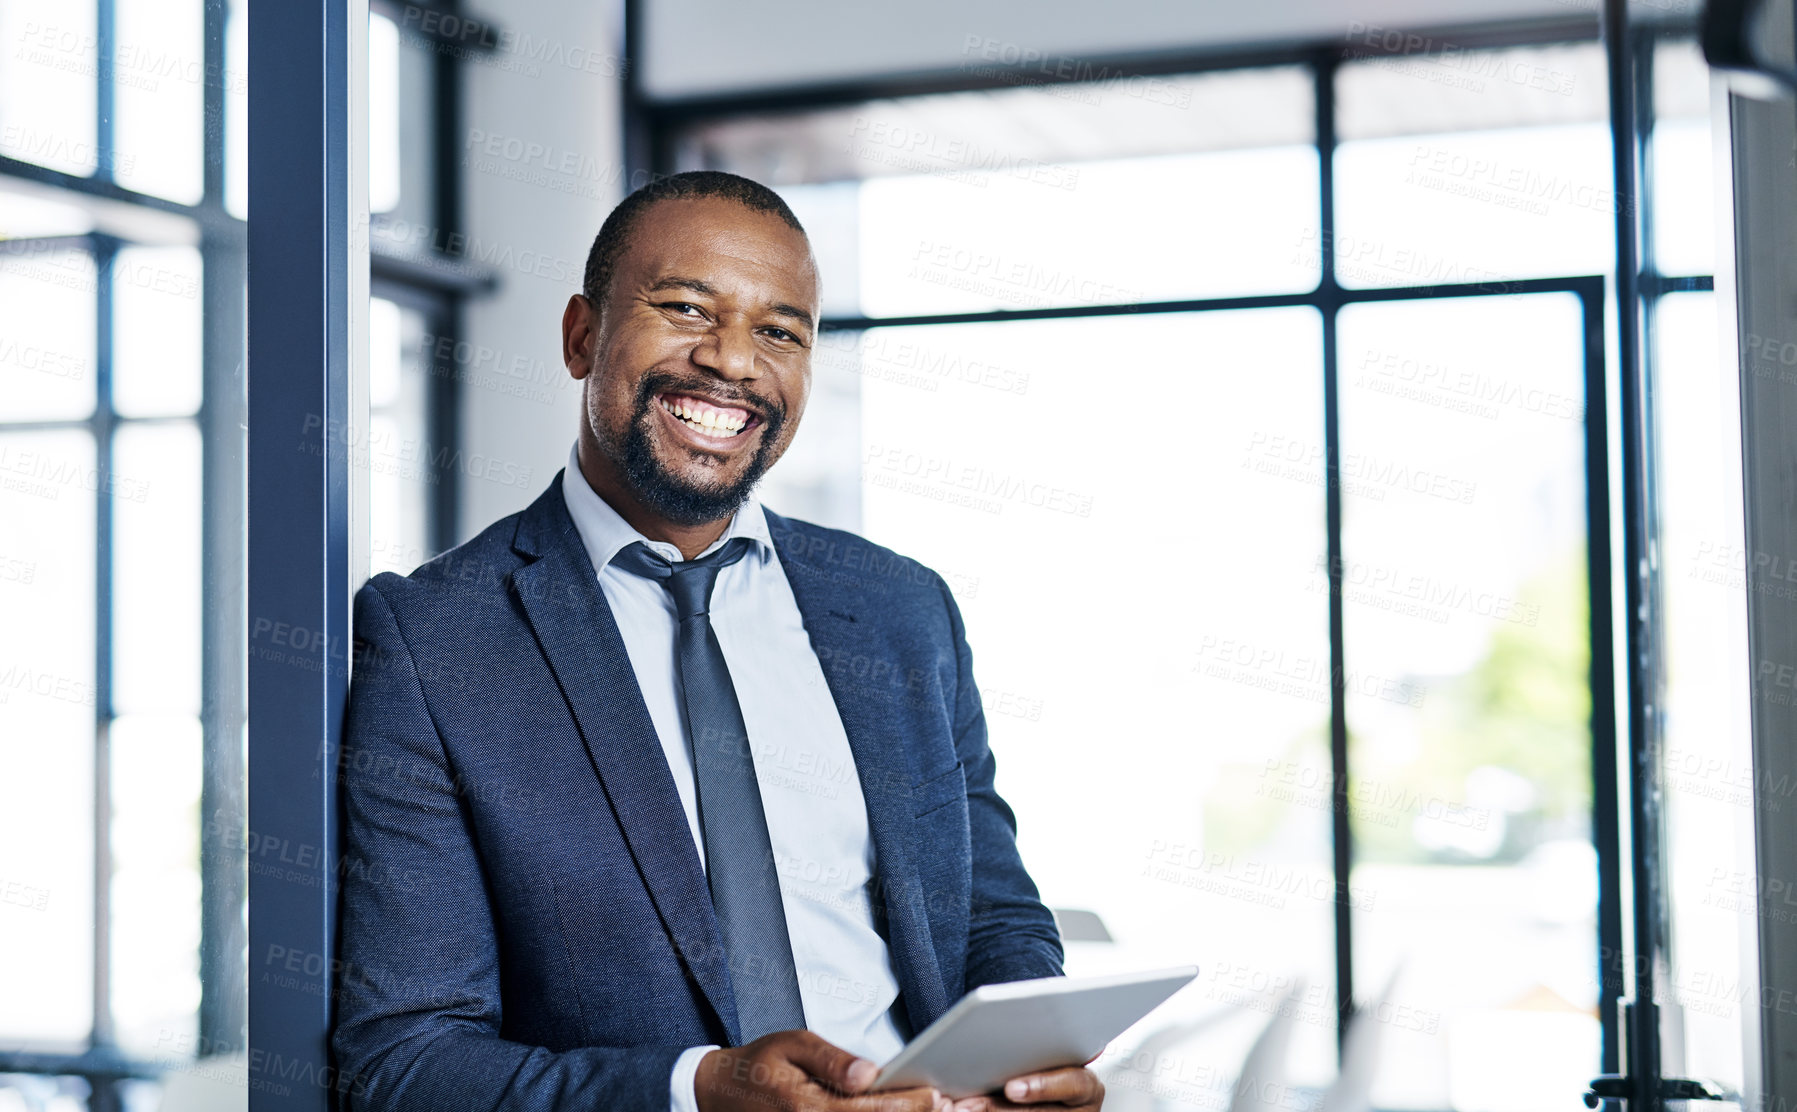 Buy stock photo Cropped portrait of a handsome middle aged businessman smiling while holding a digital tablet in a modern office